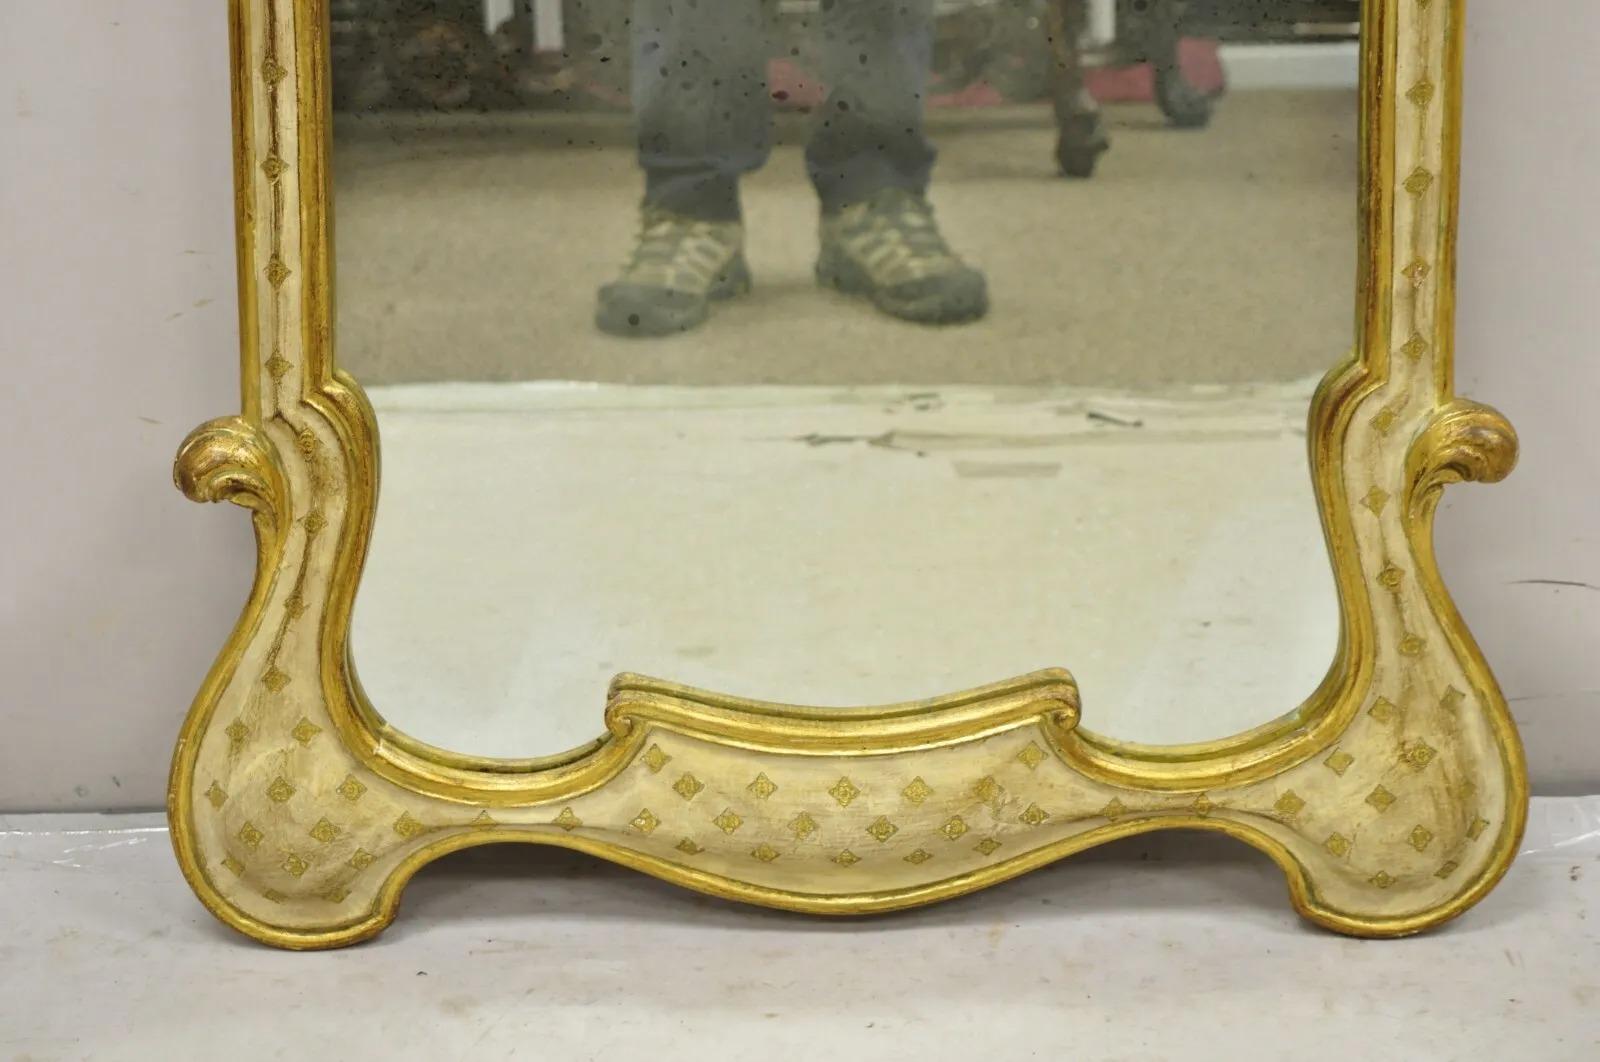 Vintage Italian Florentine Carved Sculpted Giltwood Cream and Gold Wall Mirror In Good Condition For Sale In Philadelphia, PA